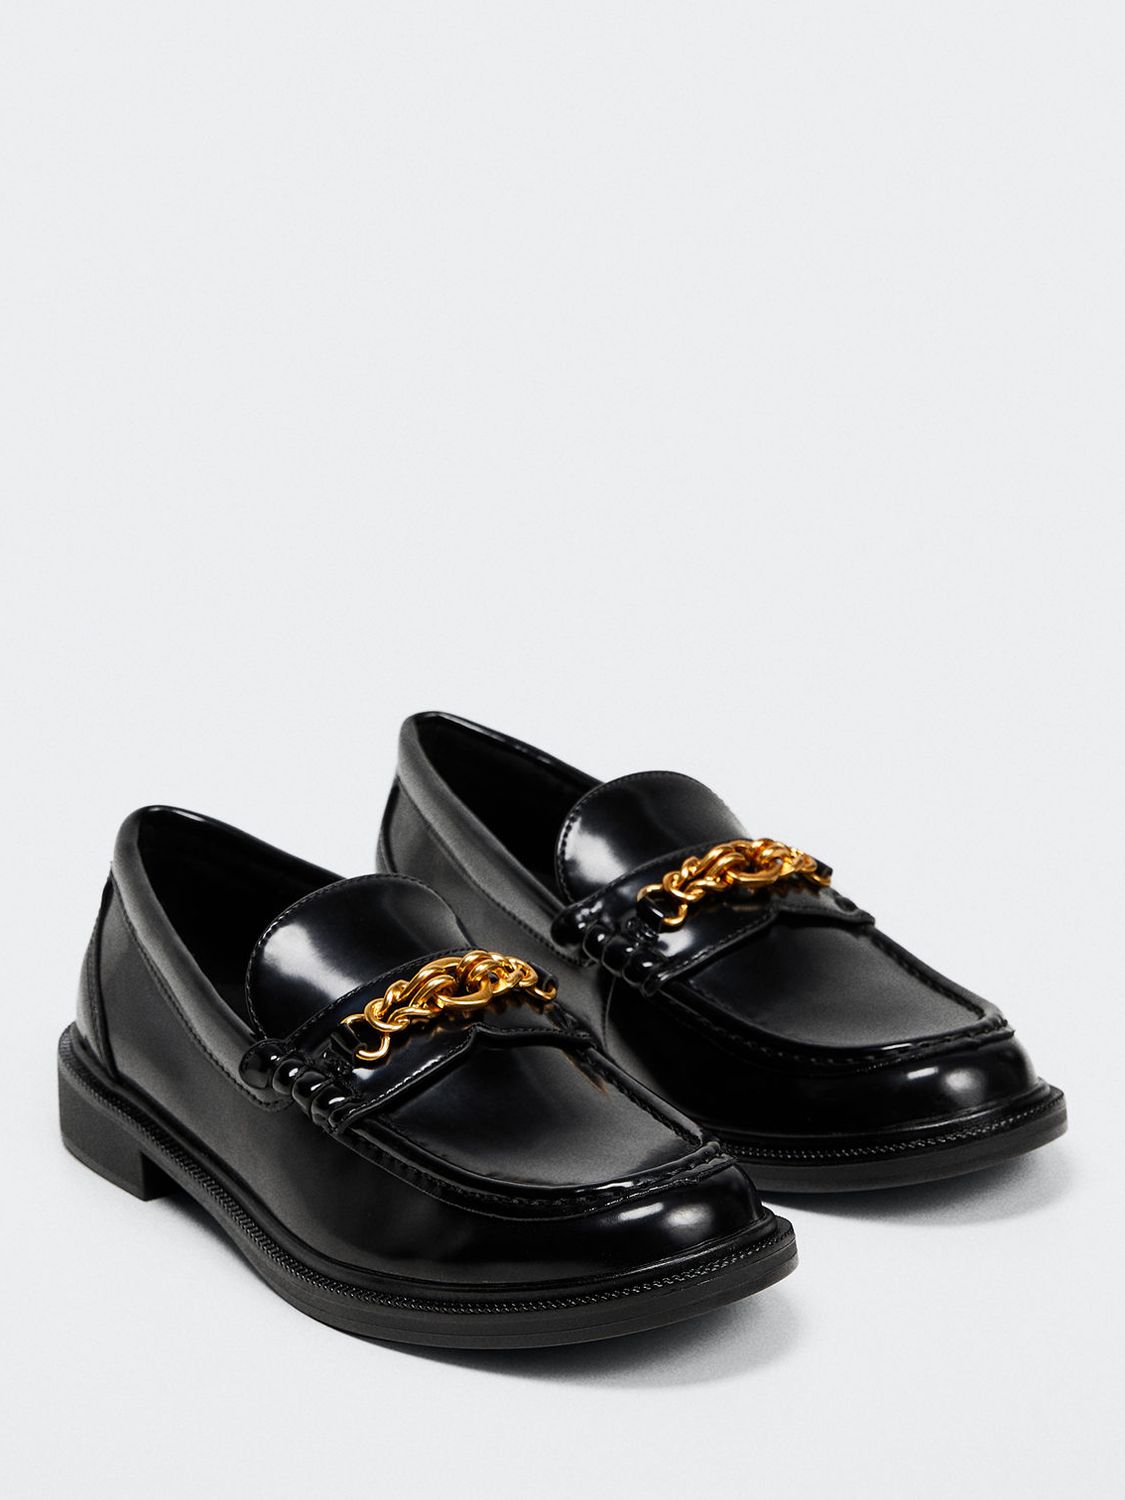 Mango Cece Chain Detail Loafers, Black at John Lewis & Partners